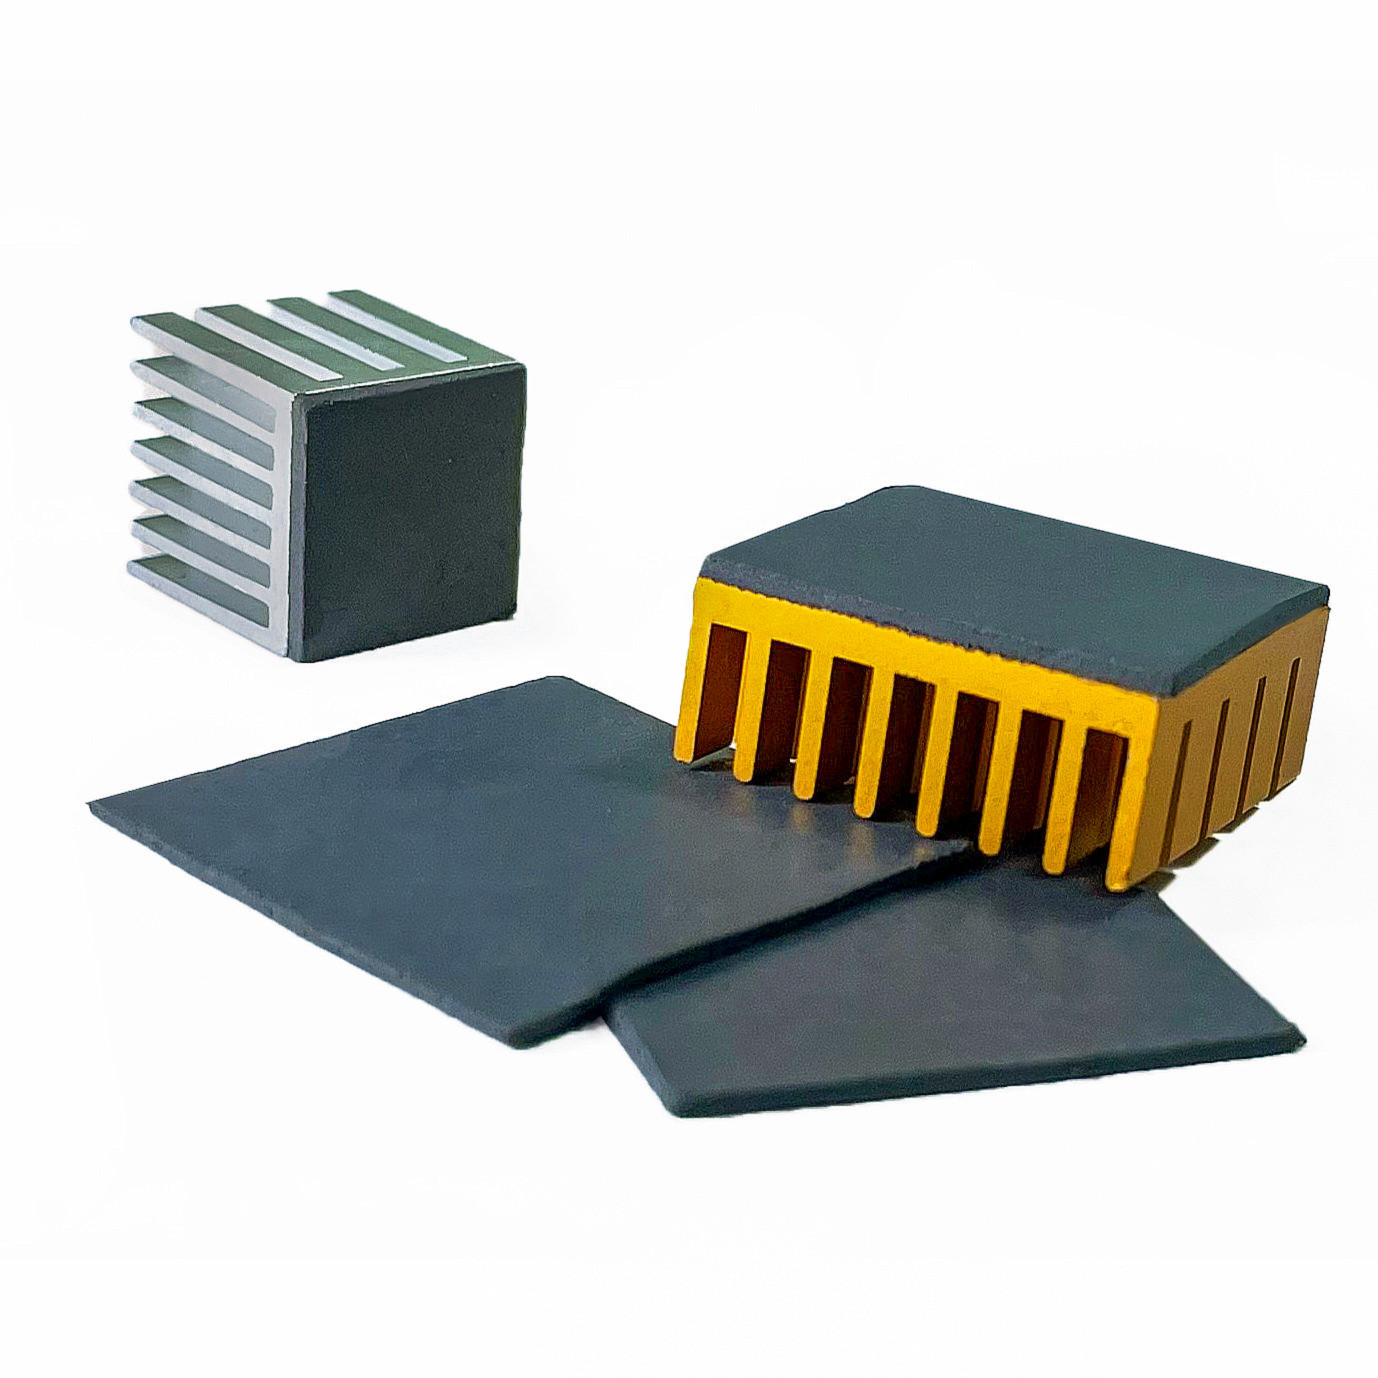 TG-AH25 Ultra High Performance Thermal Pad  T-global Technology –  Professional thermal solution, heat solution, heat dissipation, thermal  engineering solution expert